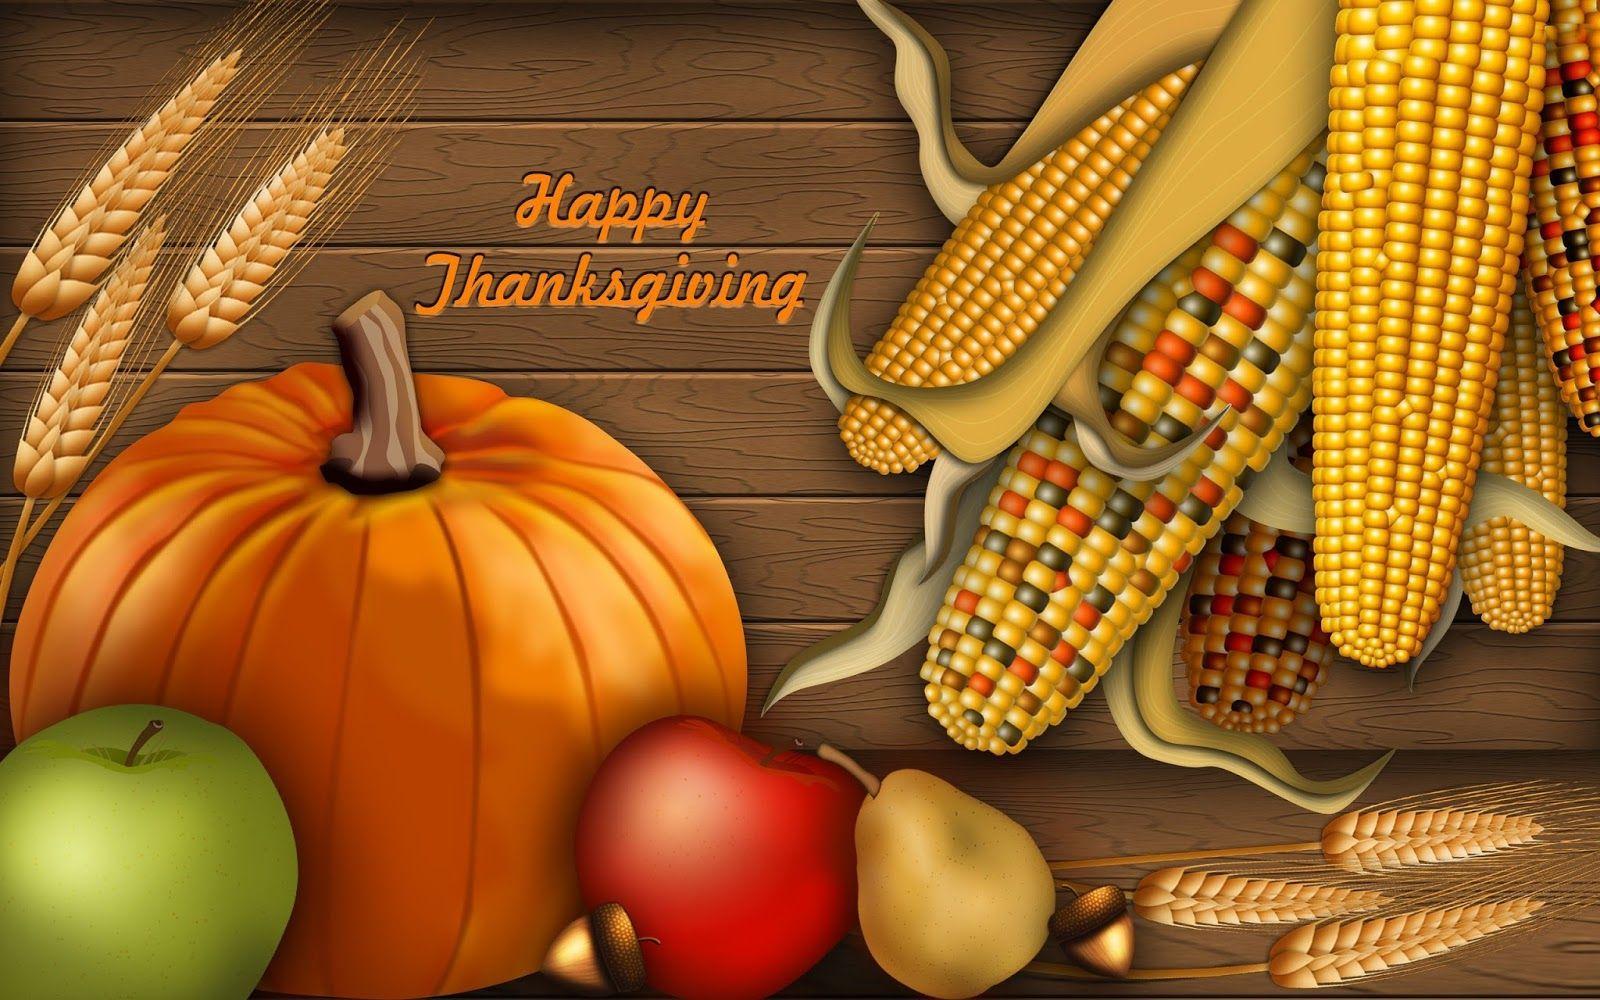 Happy Thanksgiving day HD Wallpaper 2017 Latest